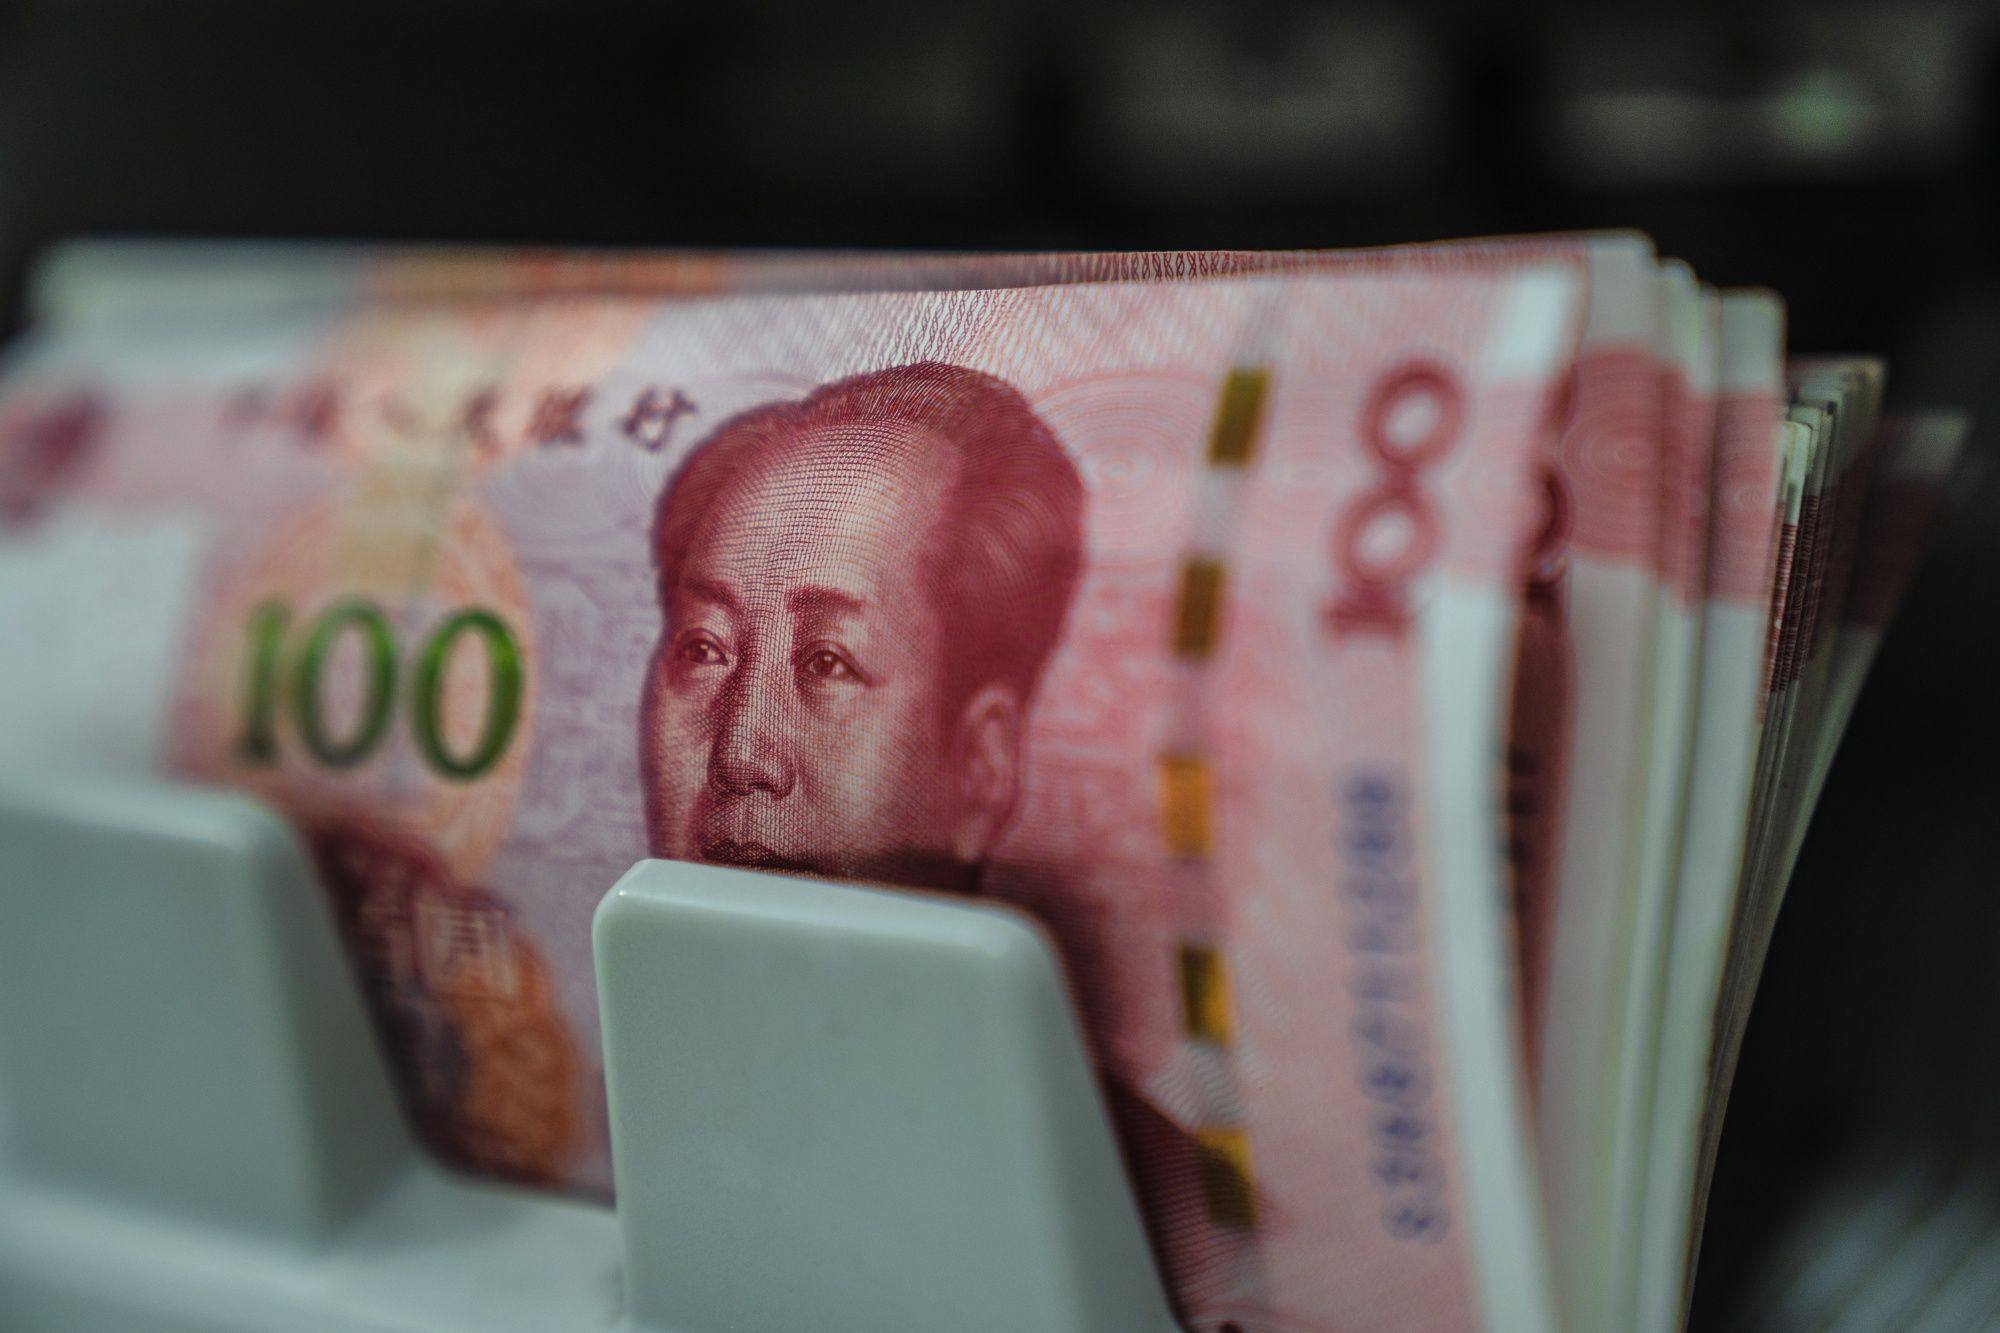 While the yuan has weakened versus the greenback this year, it has strengthened against the yen, eroding Chinese exporter competitiveness versus their Japanese peers. Photo: Bloomberg